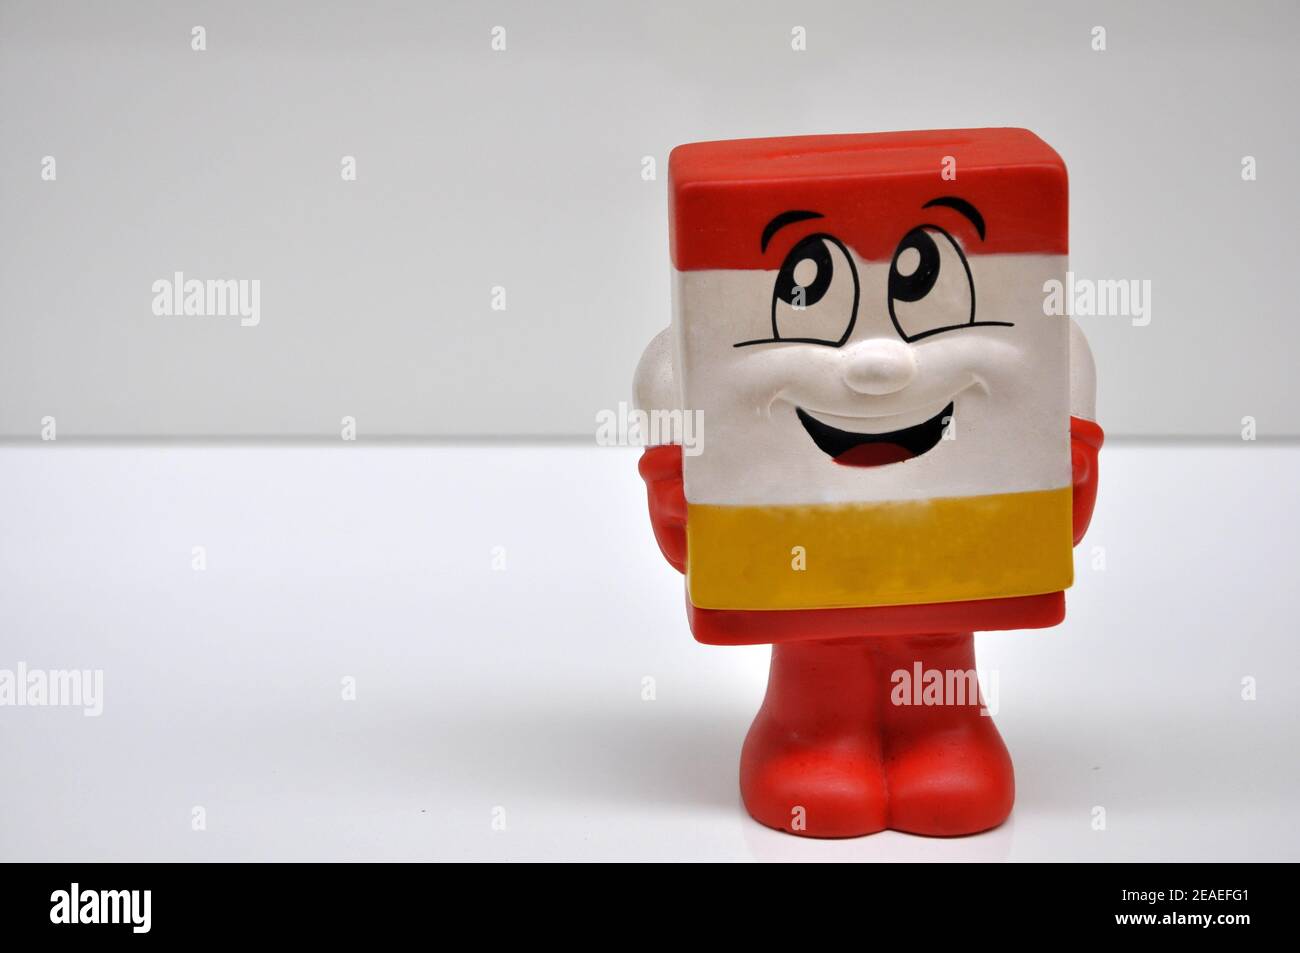 Mascot style vinyl doll with a smiley face for children with the motive of saving coins and money in yellow, white and red on white background Stock Photo